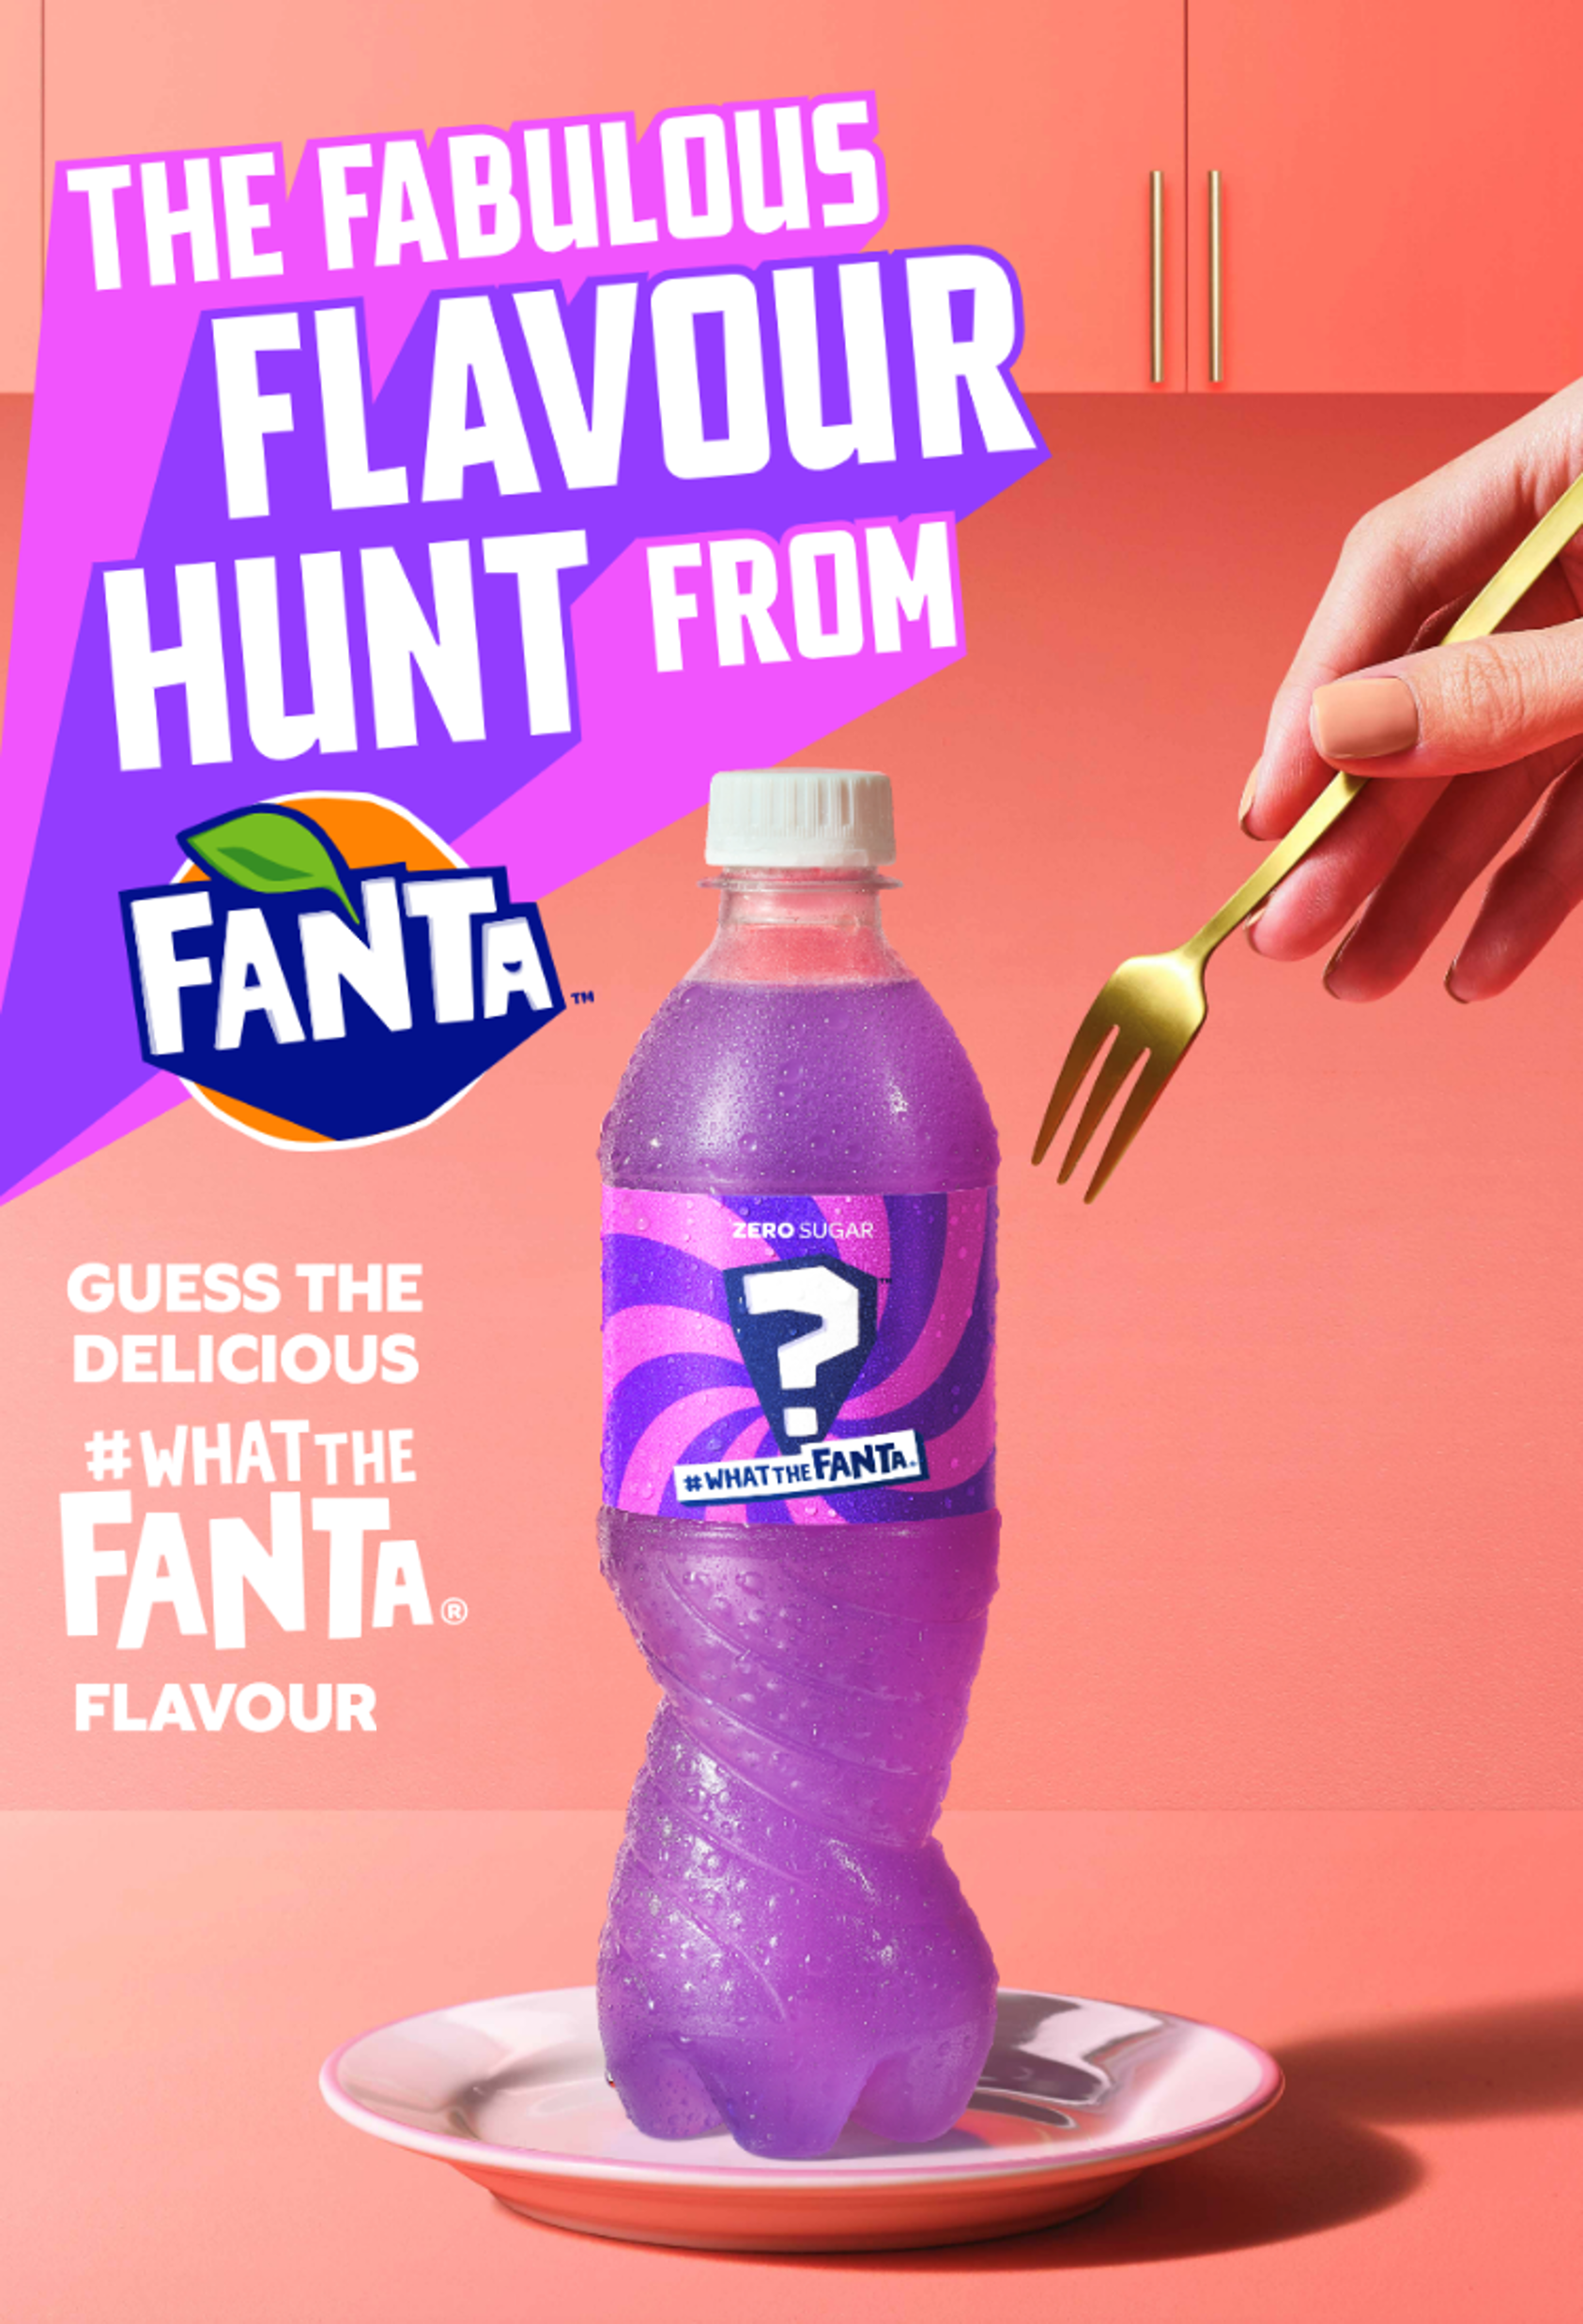 Fanta turns purple with new #WhatTheFanta Fabulous Flavour Hunt